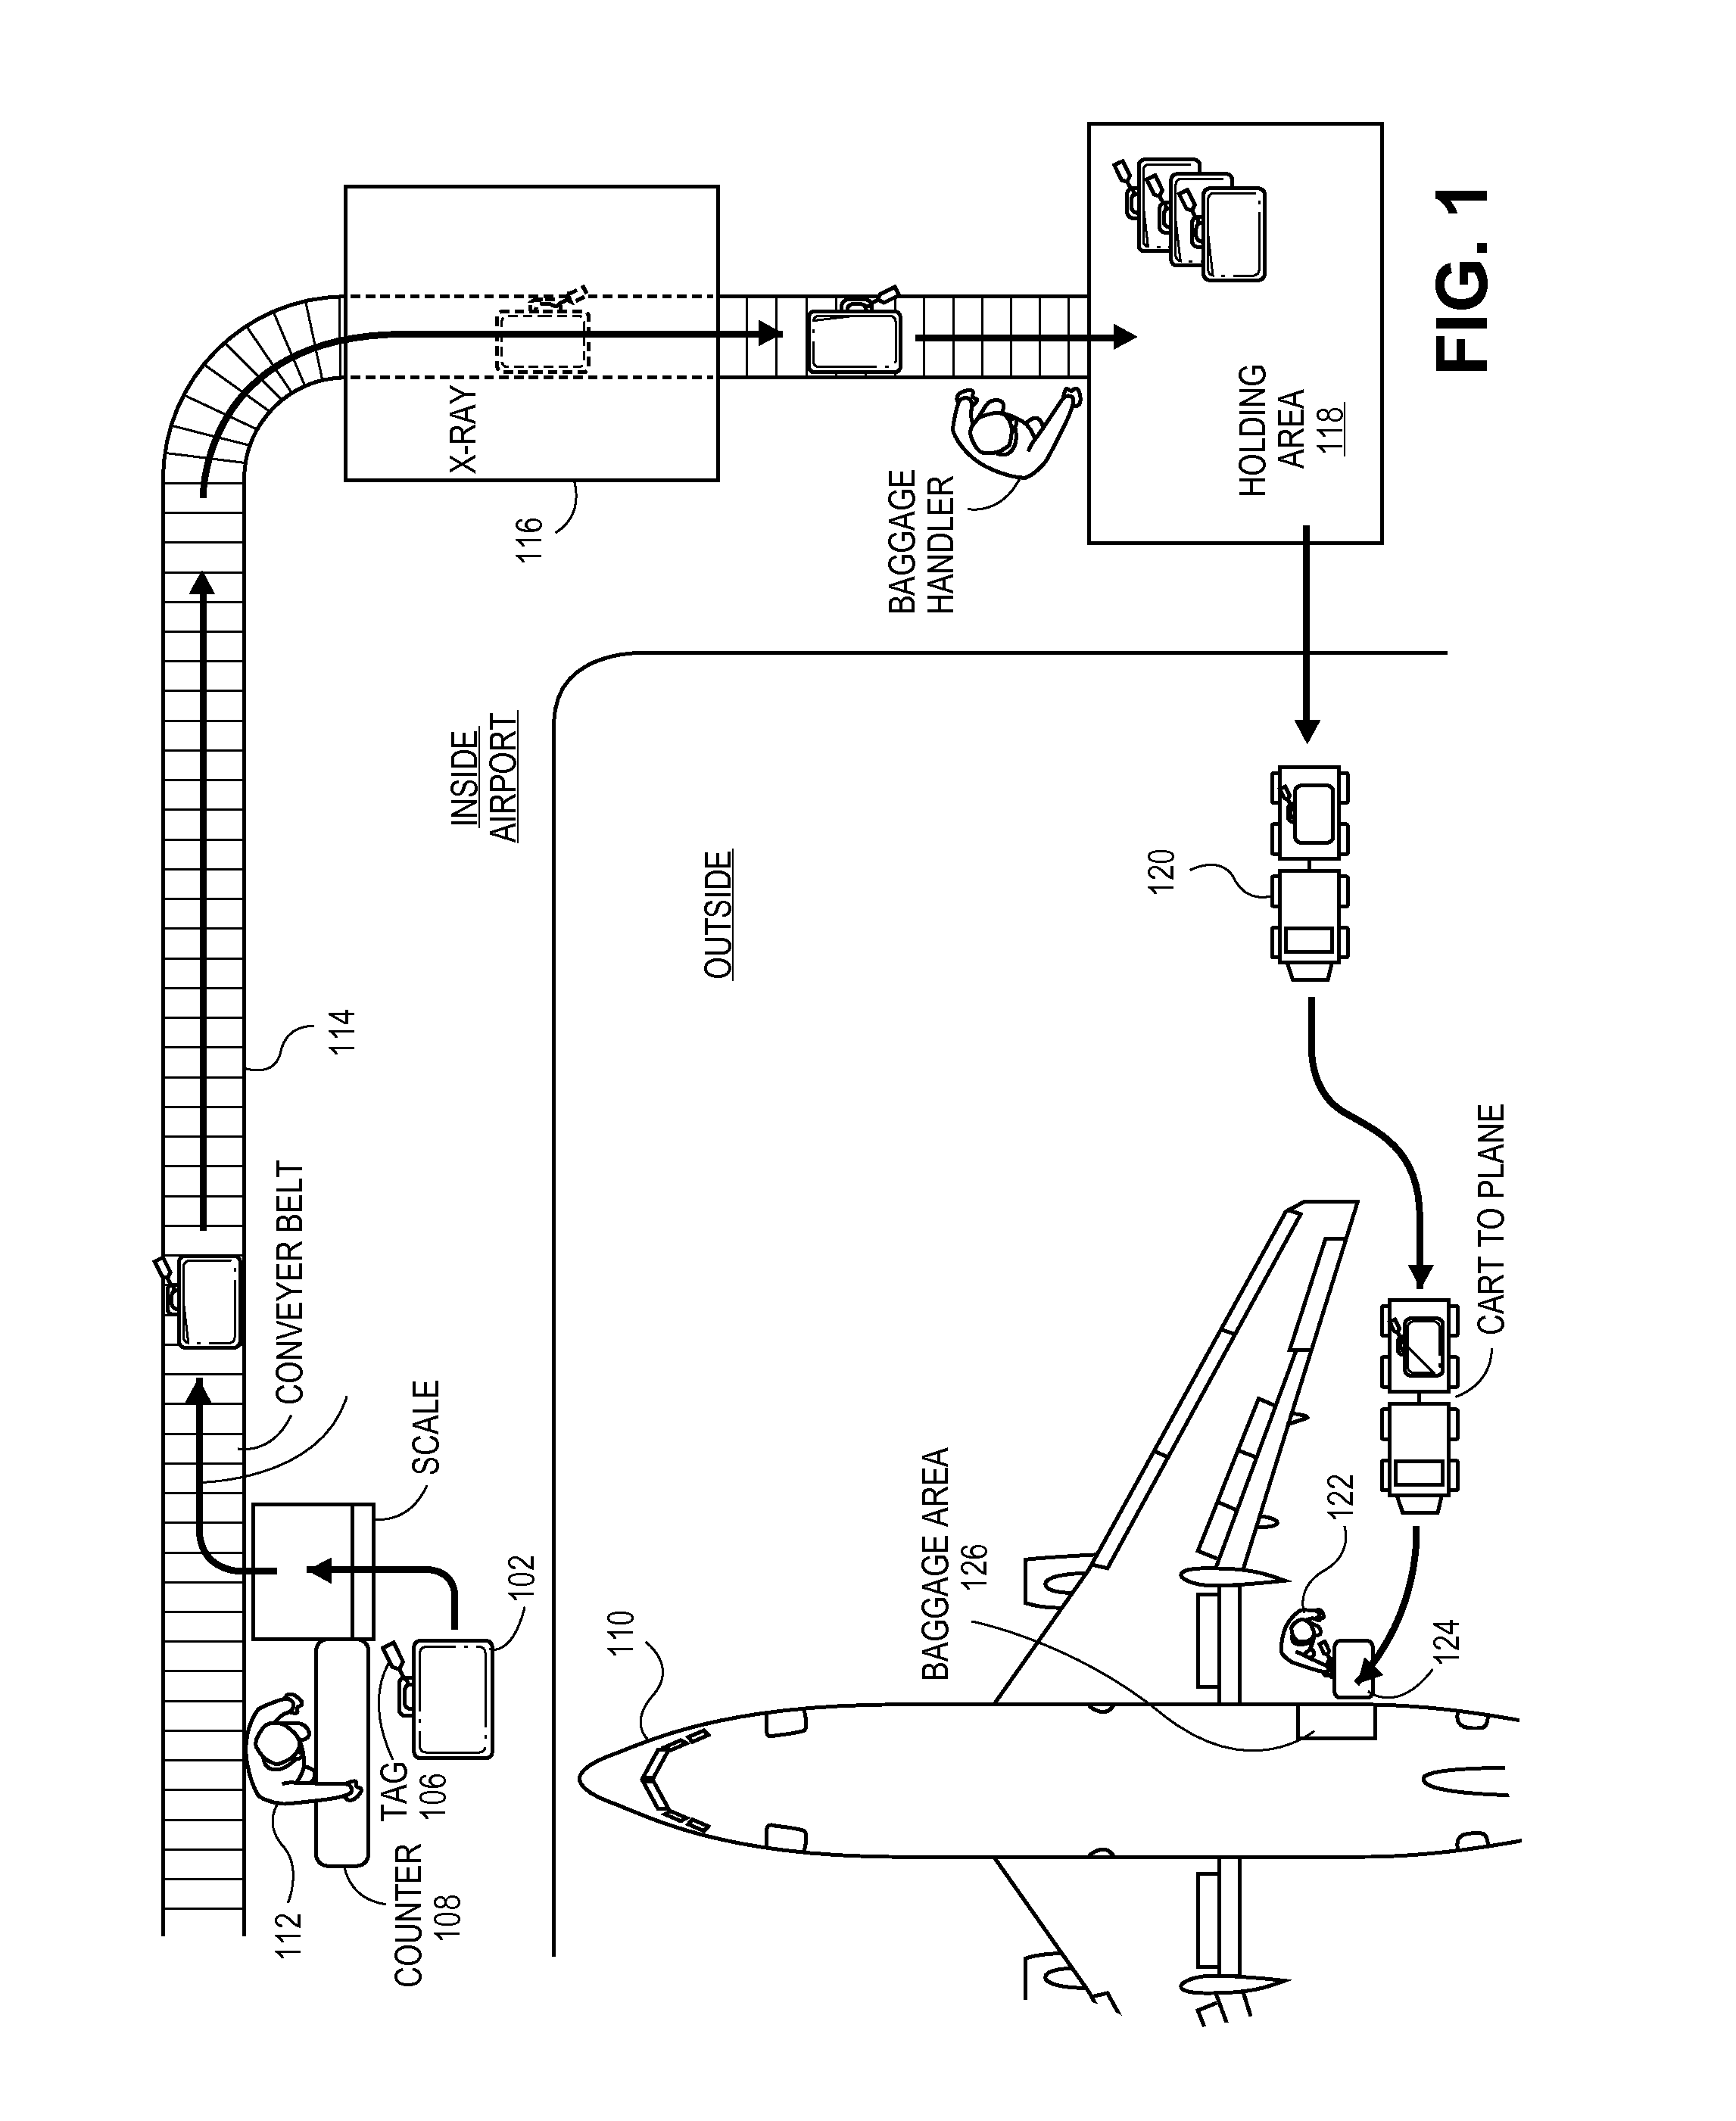 Methods and systems for gps-enabled baggage tags